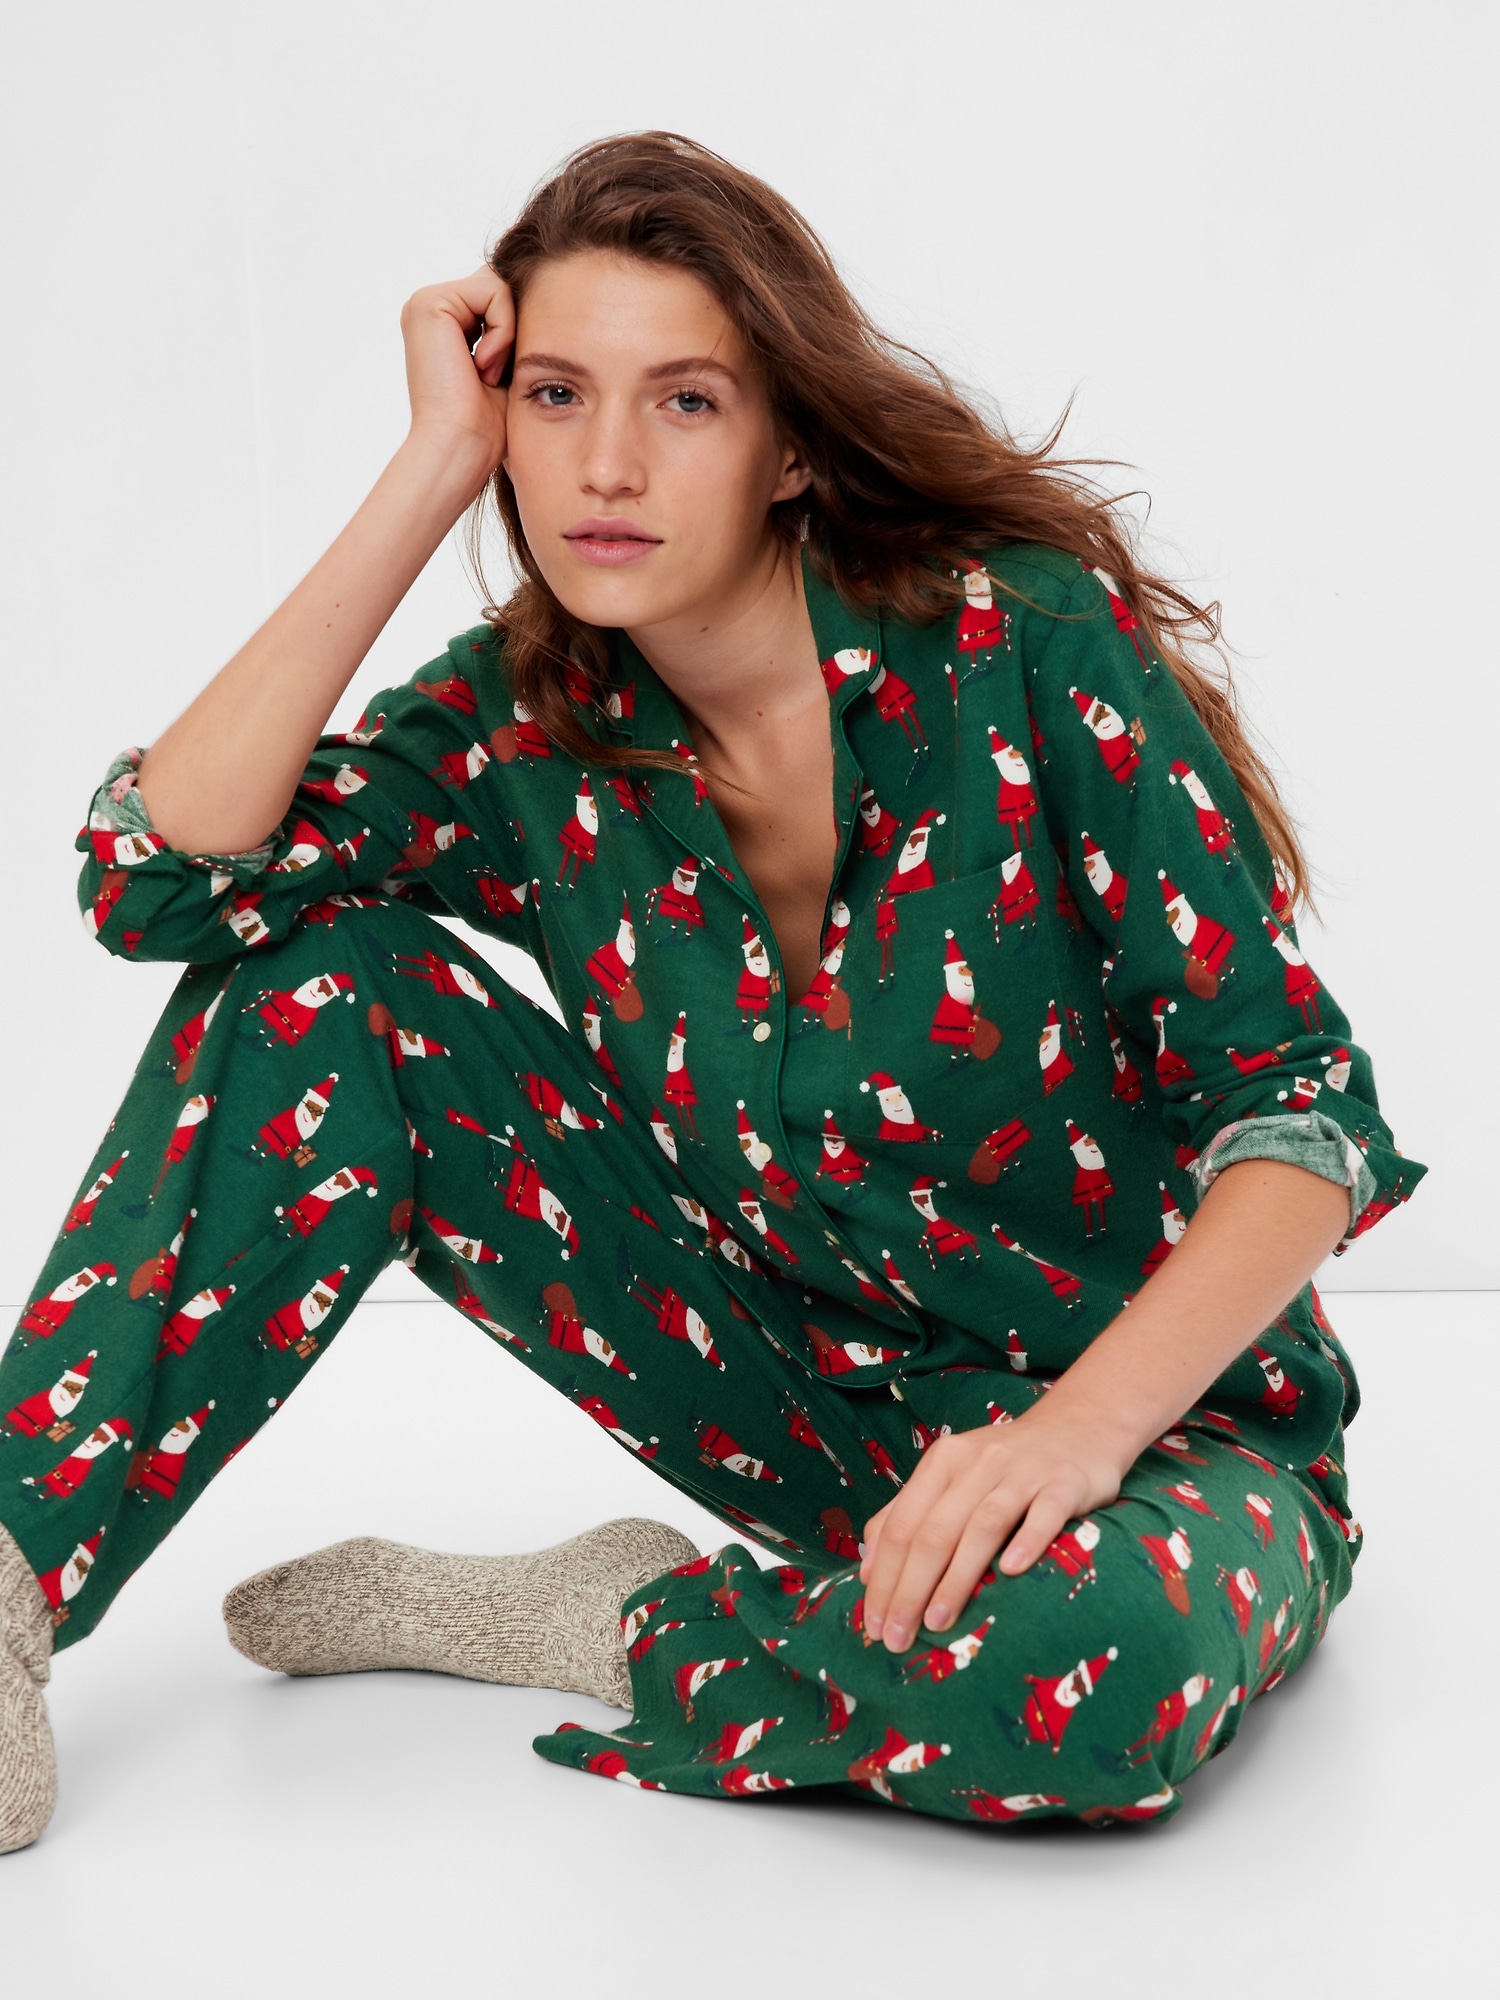 Old Navy Gap Womens Red Christmas Tree Pyjama Bottoms Elasticated Wais –  Quality Brands Outlet